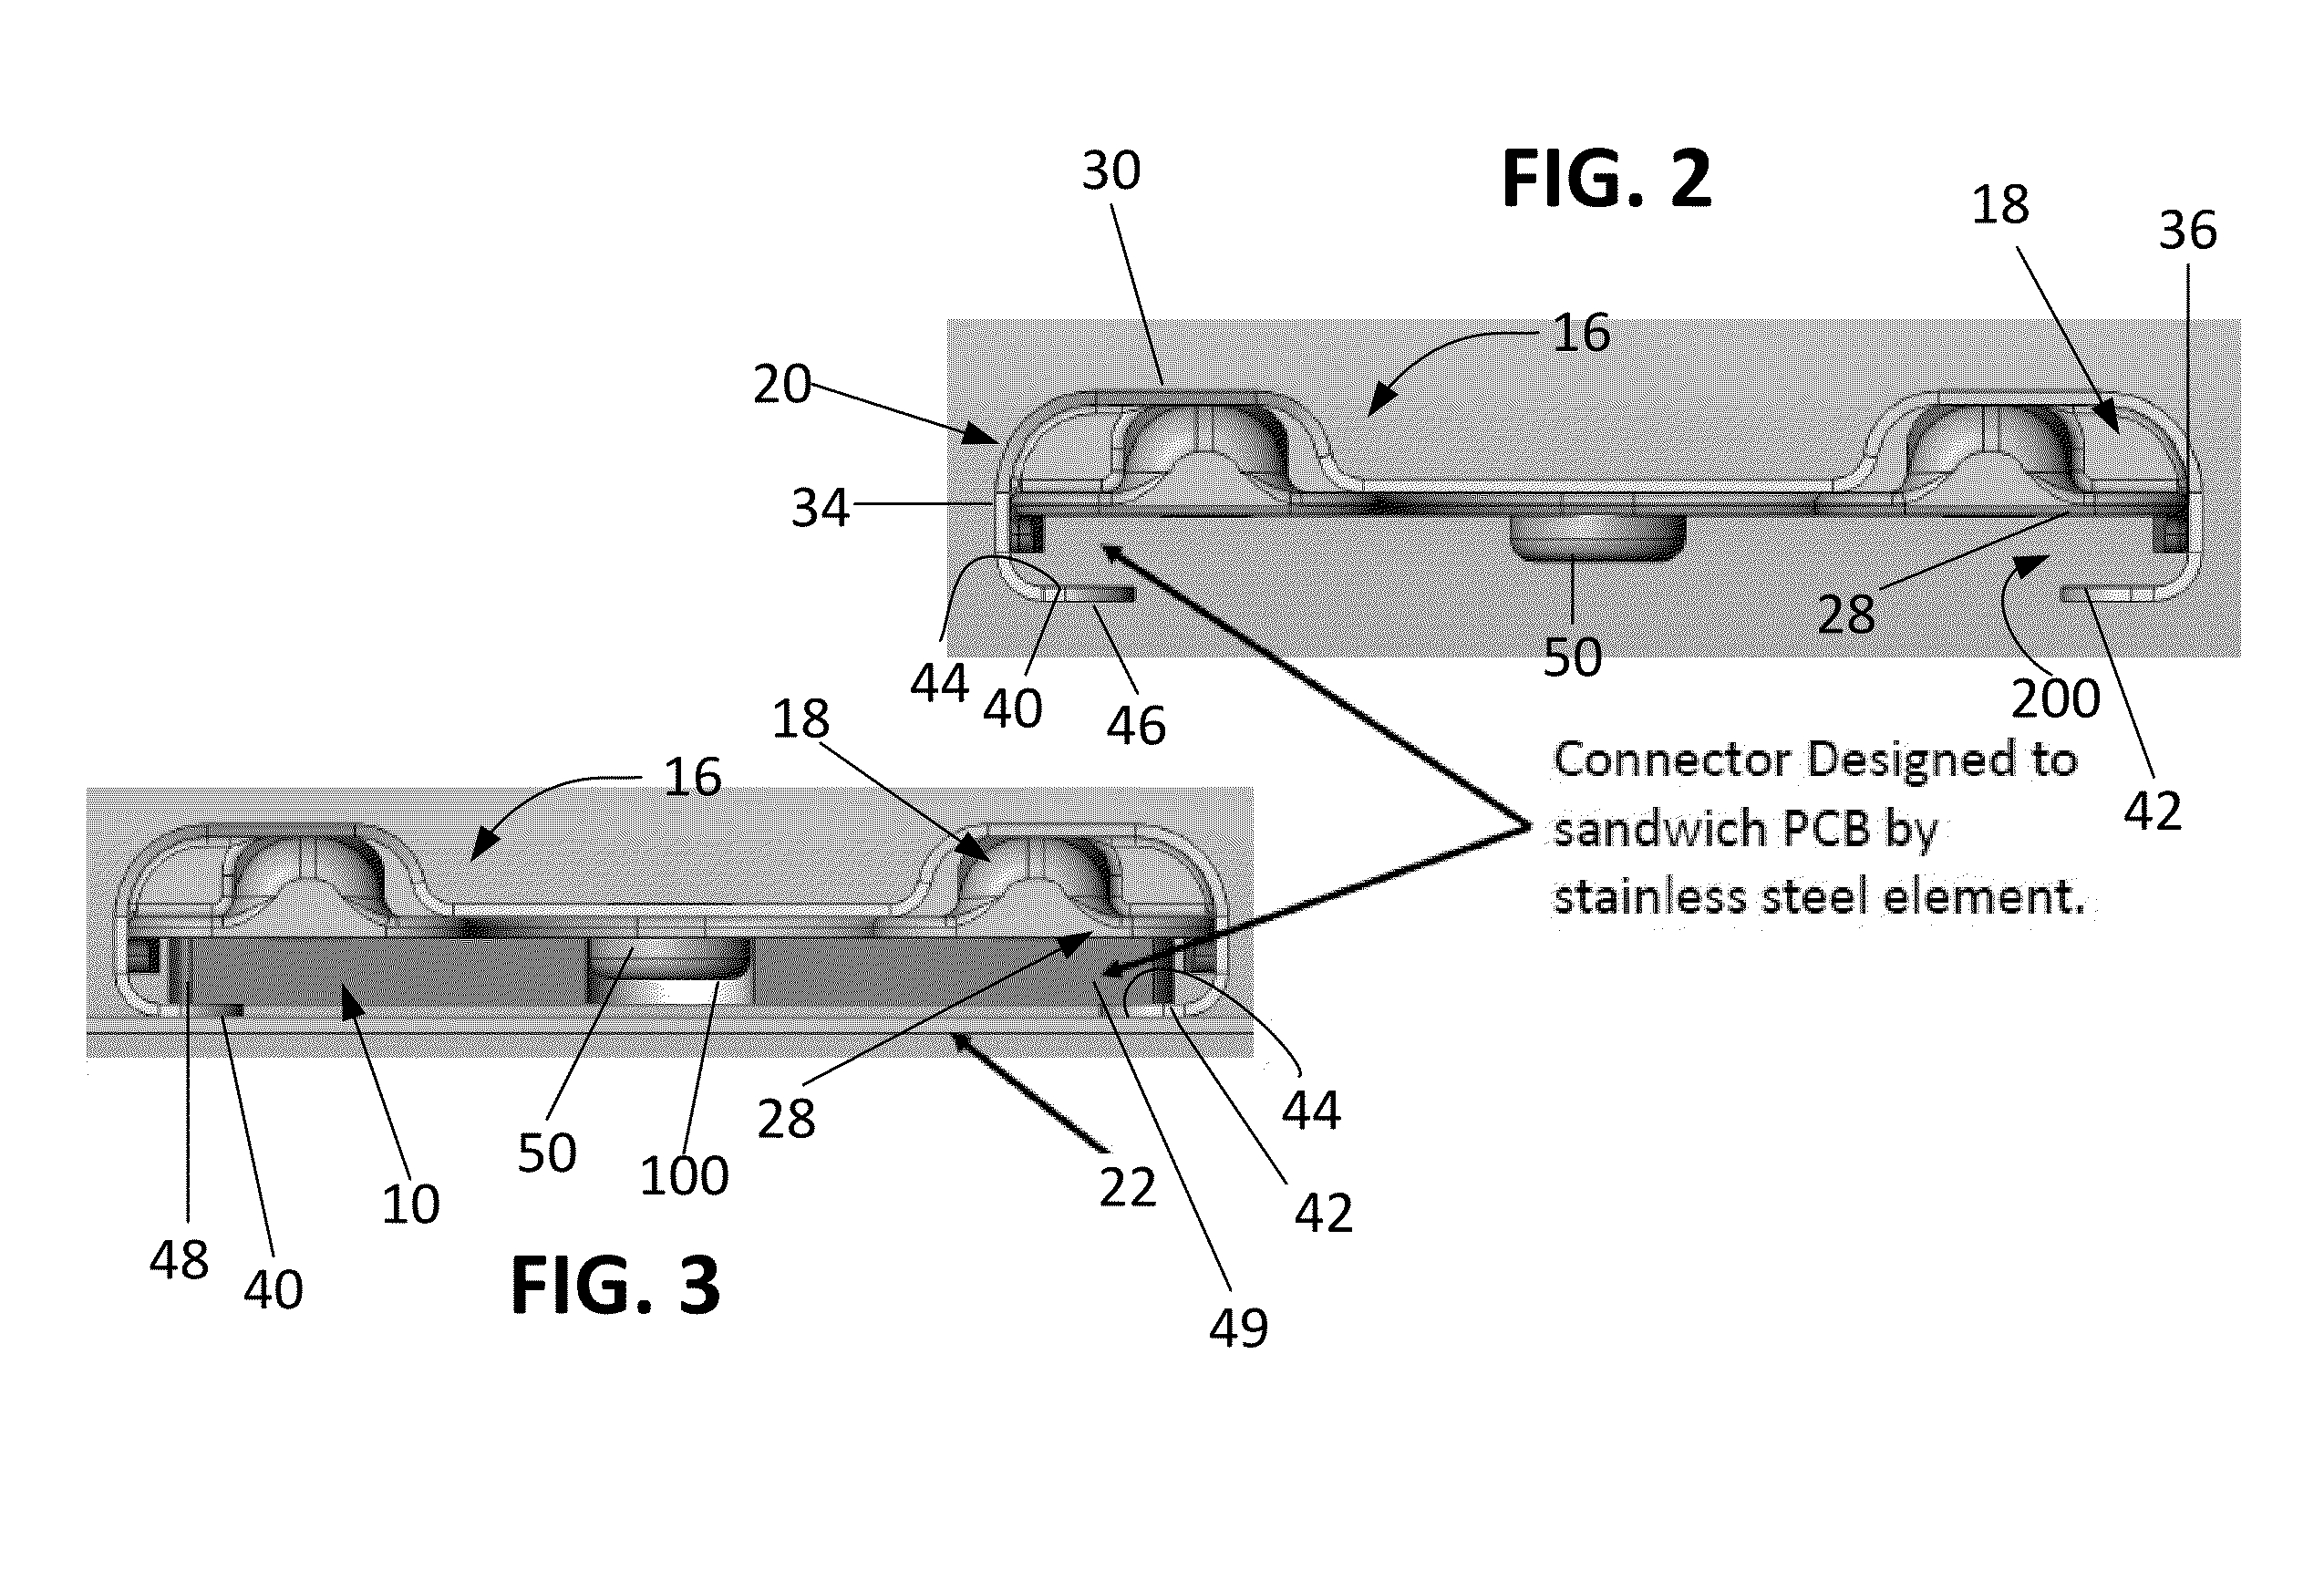 Electrical connector for use with printed circuit boards